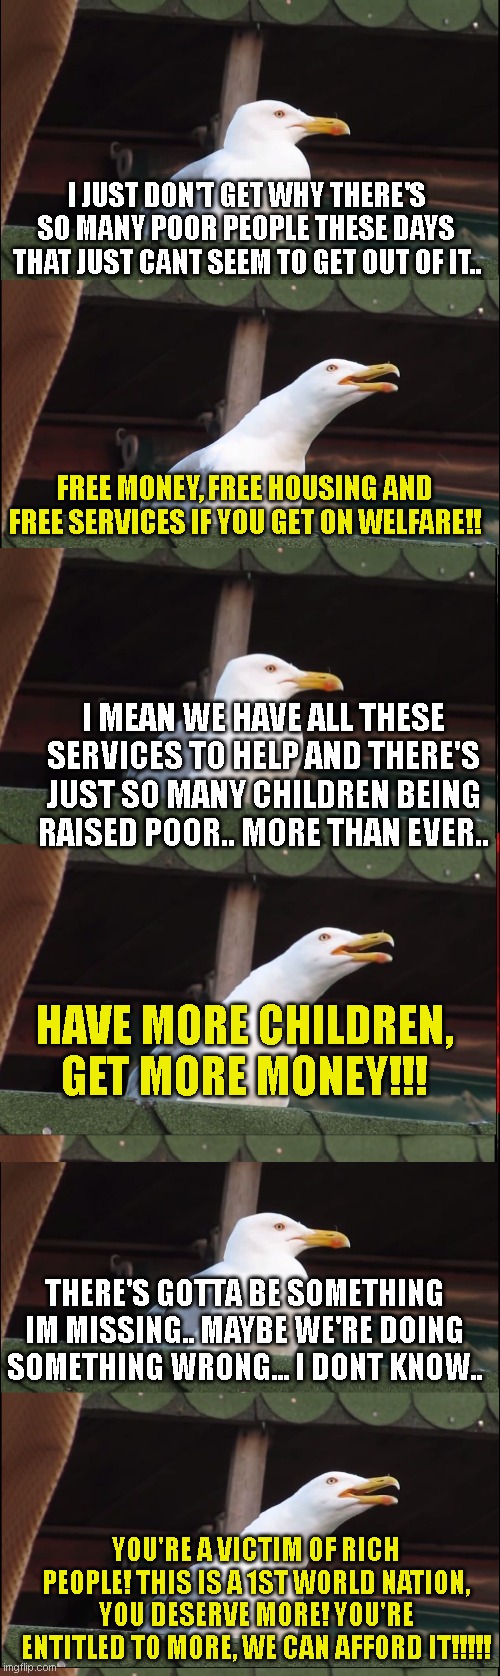 I JUST DON'T GET WHY THERE'S SO MANY POOR PEOPLE THESE DAYS THAT JUST CANT SEEM TO GET OUT OF IT.. FREE MONEY, FREE HOUSING AND FREE SERVICES IF YOU GET ON WELFARE!! I MEAN WE HAVE ALL THESE SERVICES TO HELP AND THERE'S JUST SO MANY CHILDREN BEING RAISED POOR.. MORE THAN EVER.. HAVE MORE CHILDREN, GET MORE MONEY!!! THERE'S GOTTA BE SOMETHING IM MISSING.. MAYBE WE'RE DOING SOMETHING WRONG... I DONT KNOW.. YOU'RE A VICTIM OF RICH PEOPLE! THIS IS A 1ST WORLD NATION, YOU DESERVE MORE! YOU'RE ENTITLED TO MORE, WE CAN AFFORD IT!!!!! | image tagged in memes,inhaling seagull | made w/ Imgflip meme maker